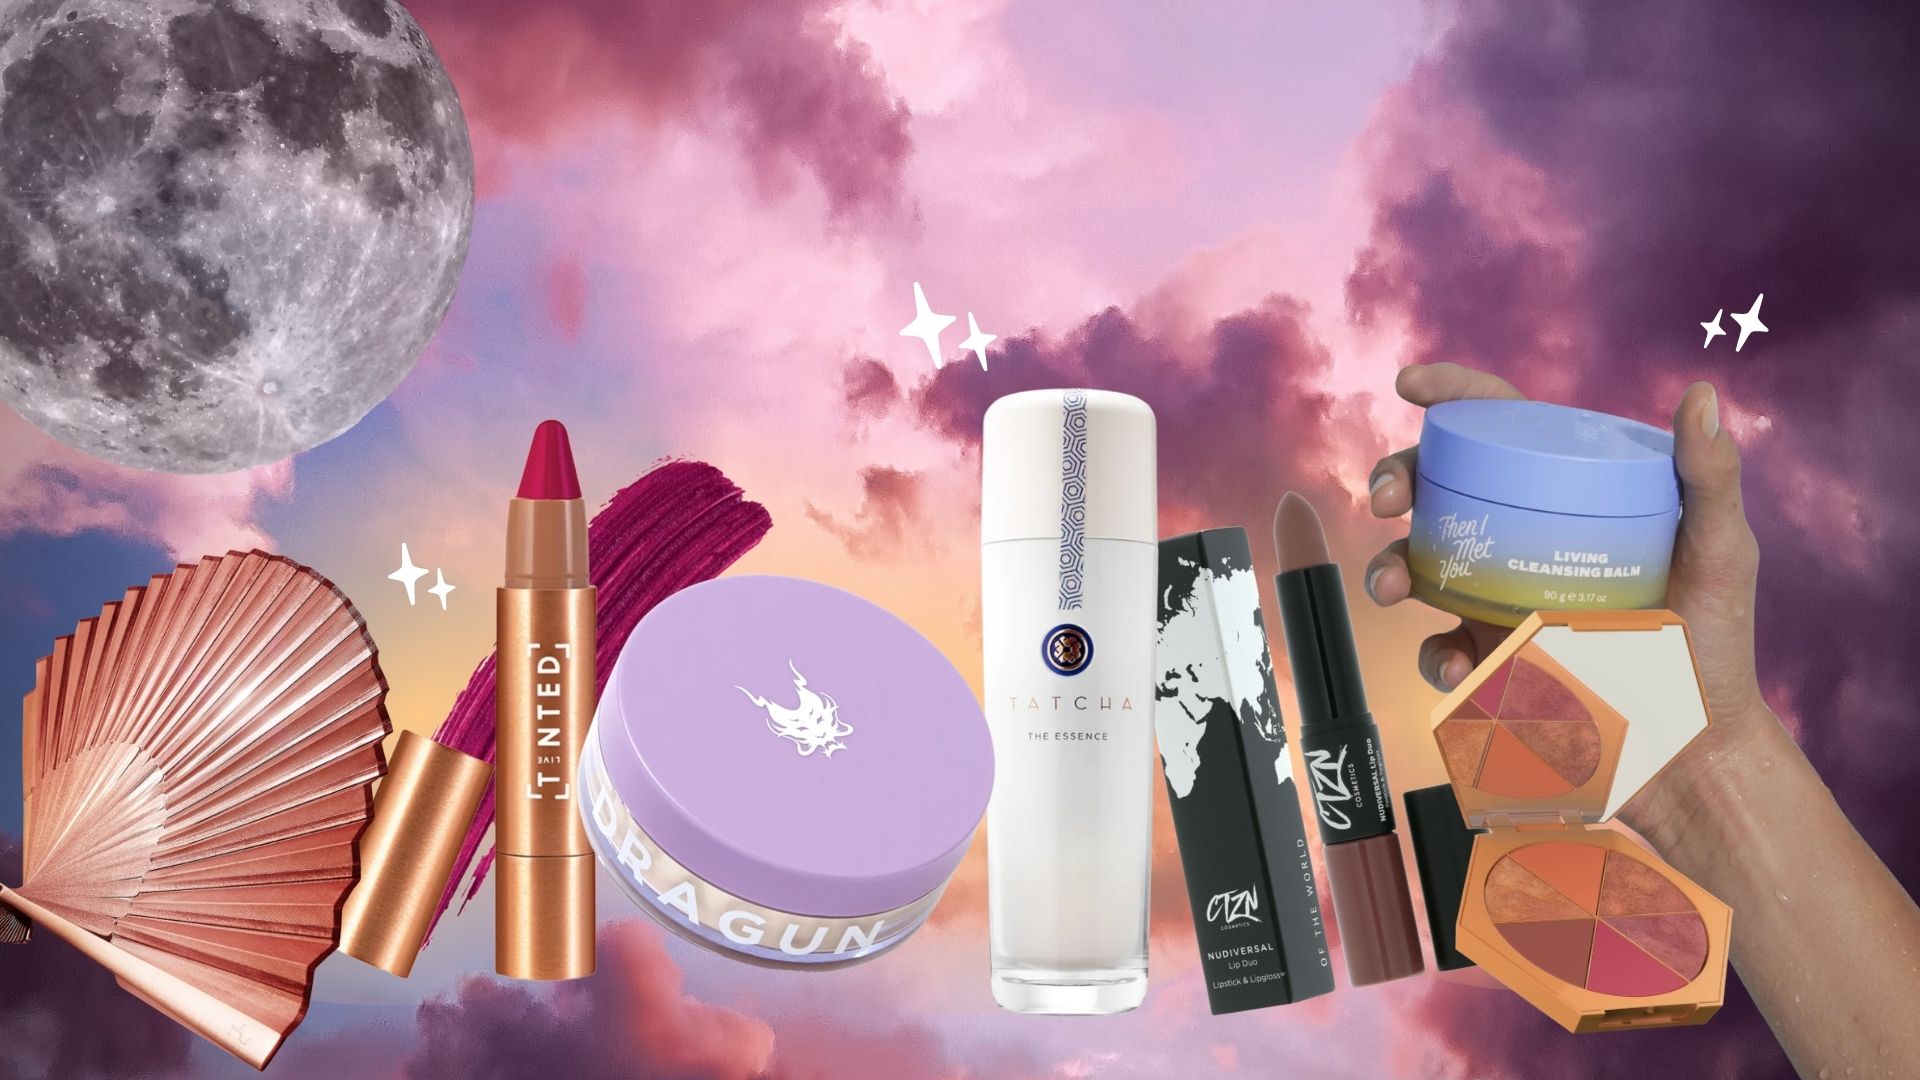 24 Asian-Owned Beauty Brands 2022 - Asian Beauty Products